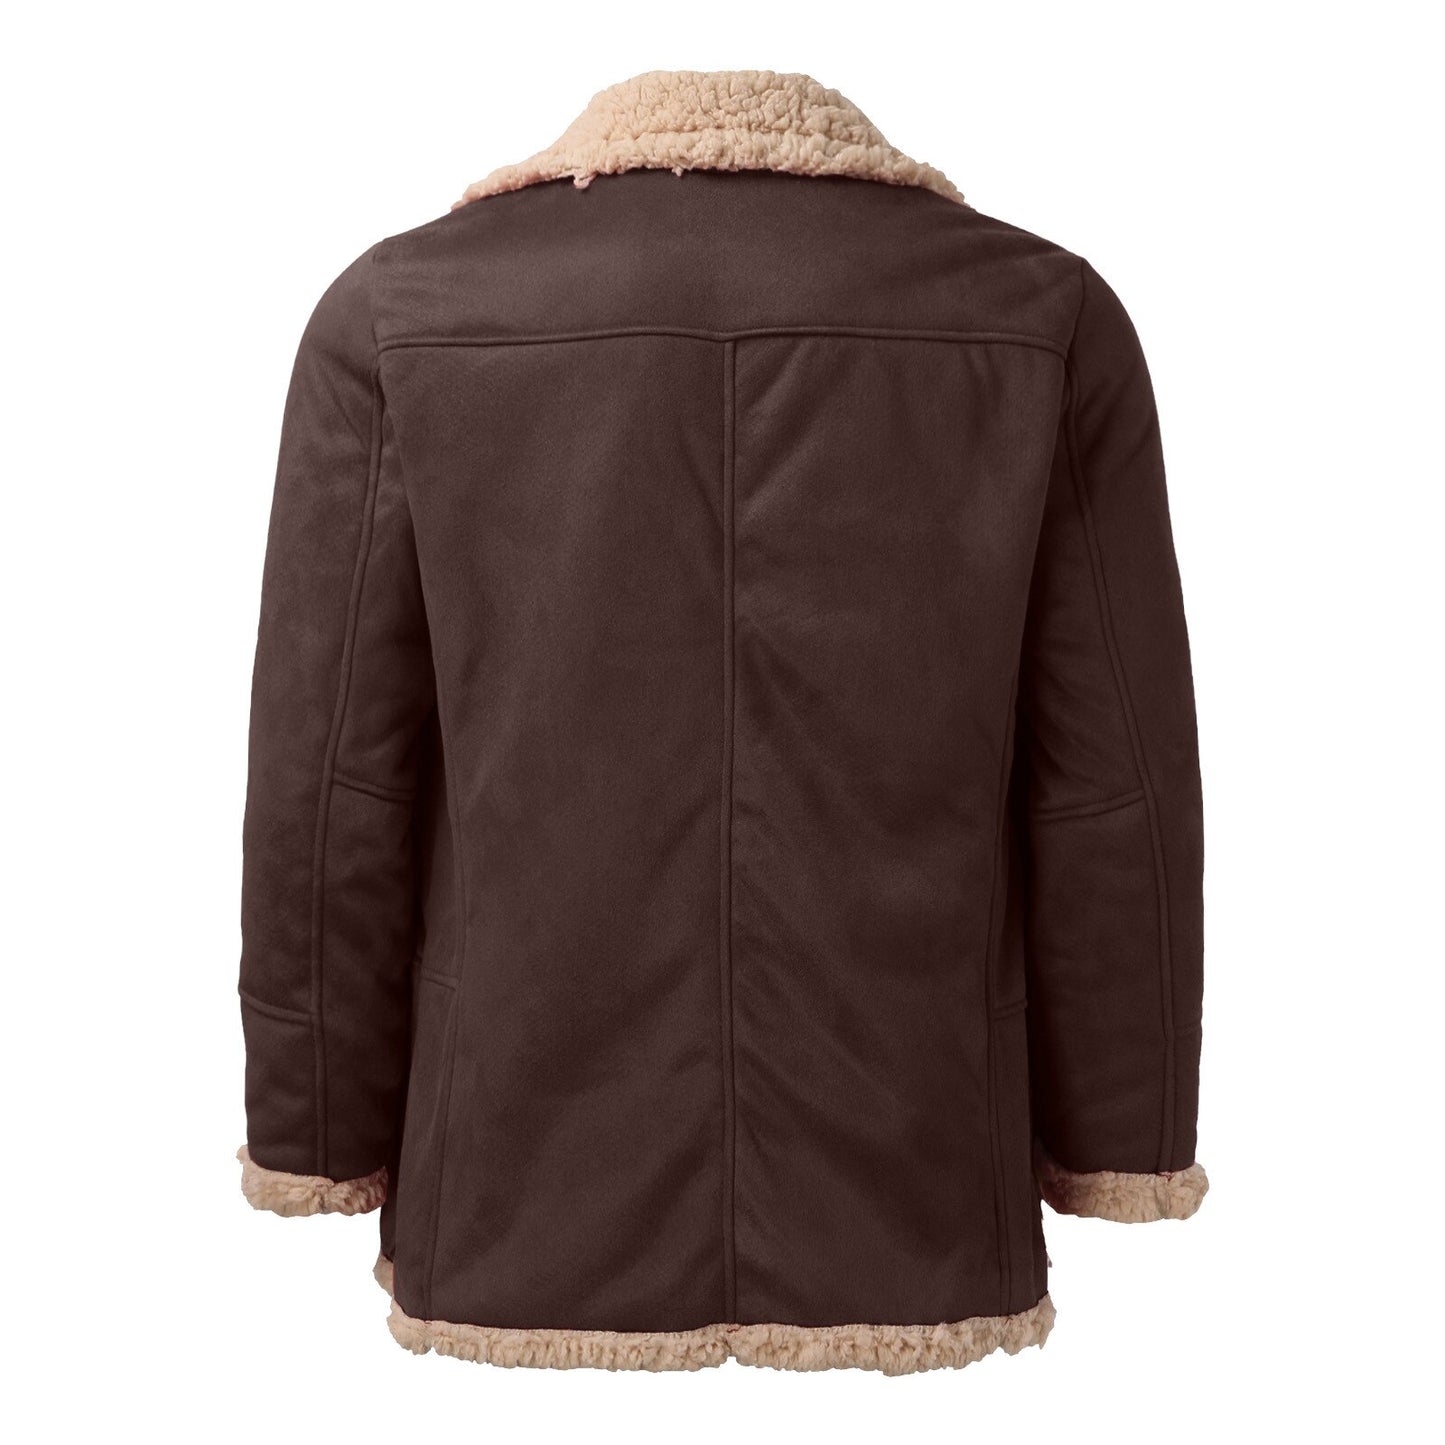 Men's Insulated Leather Outdoor Jacket